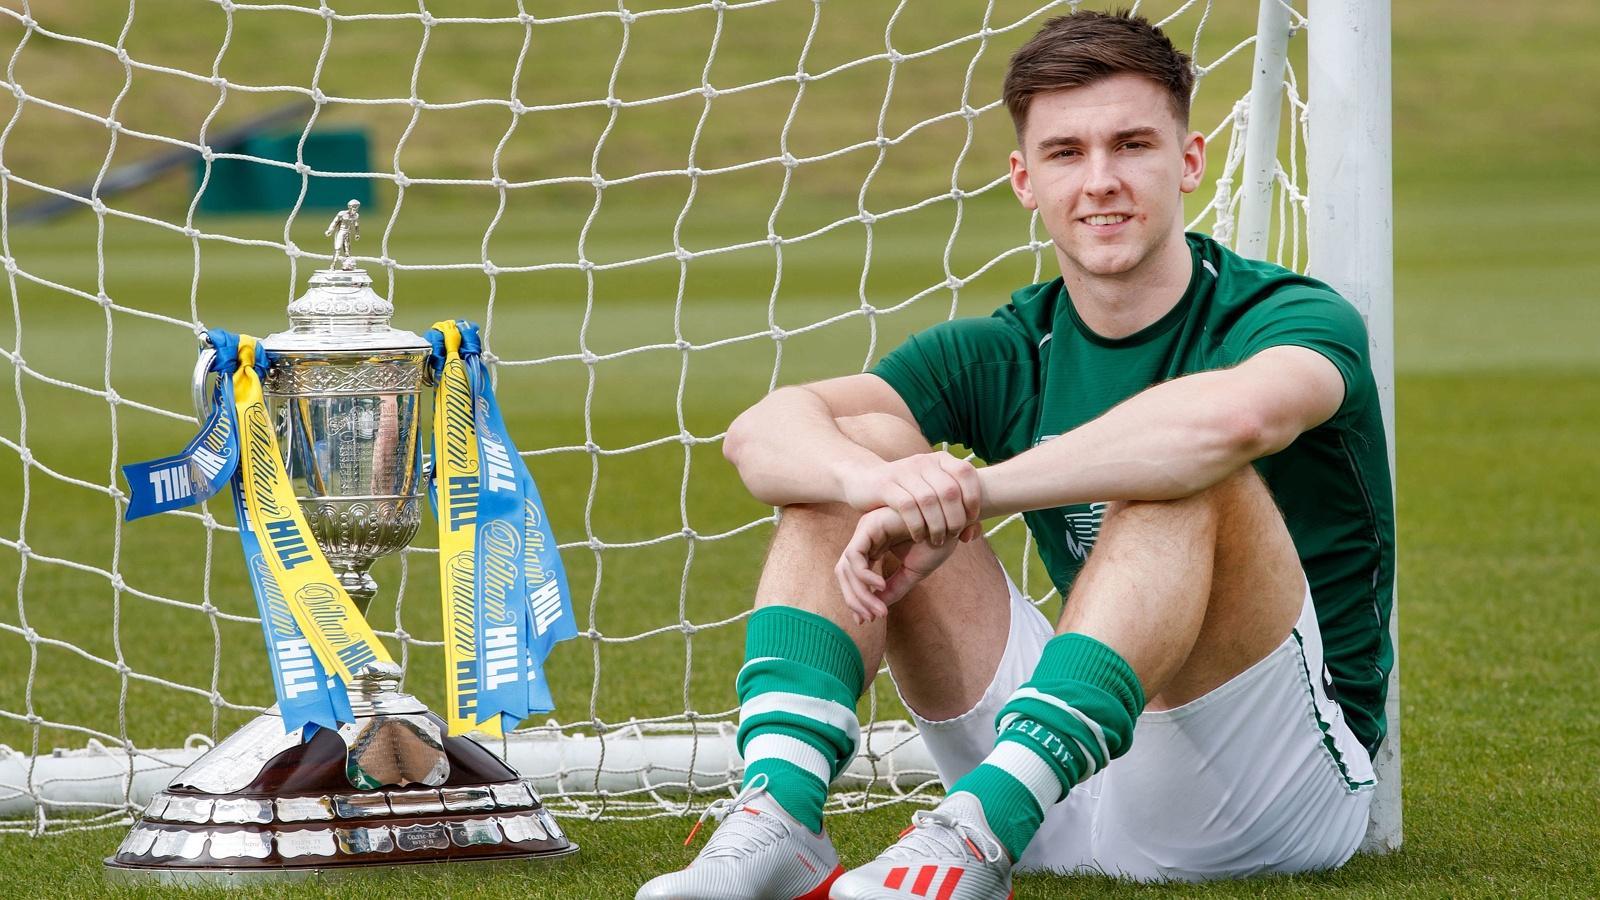 Every trophy feels better than the last one, says Celtic's Kieran